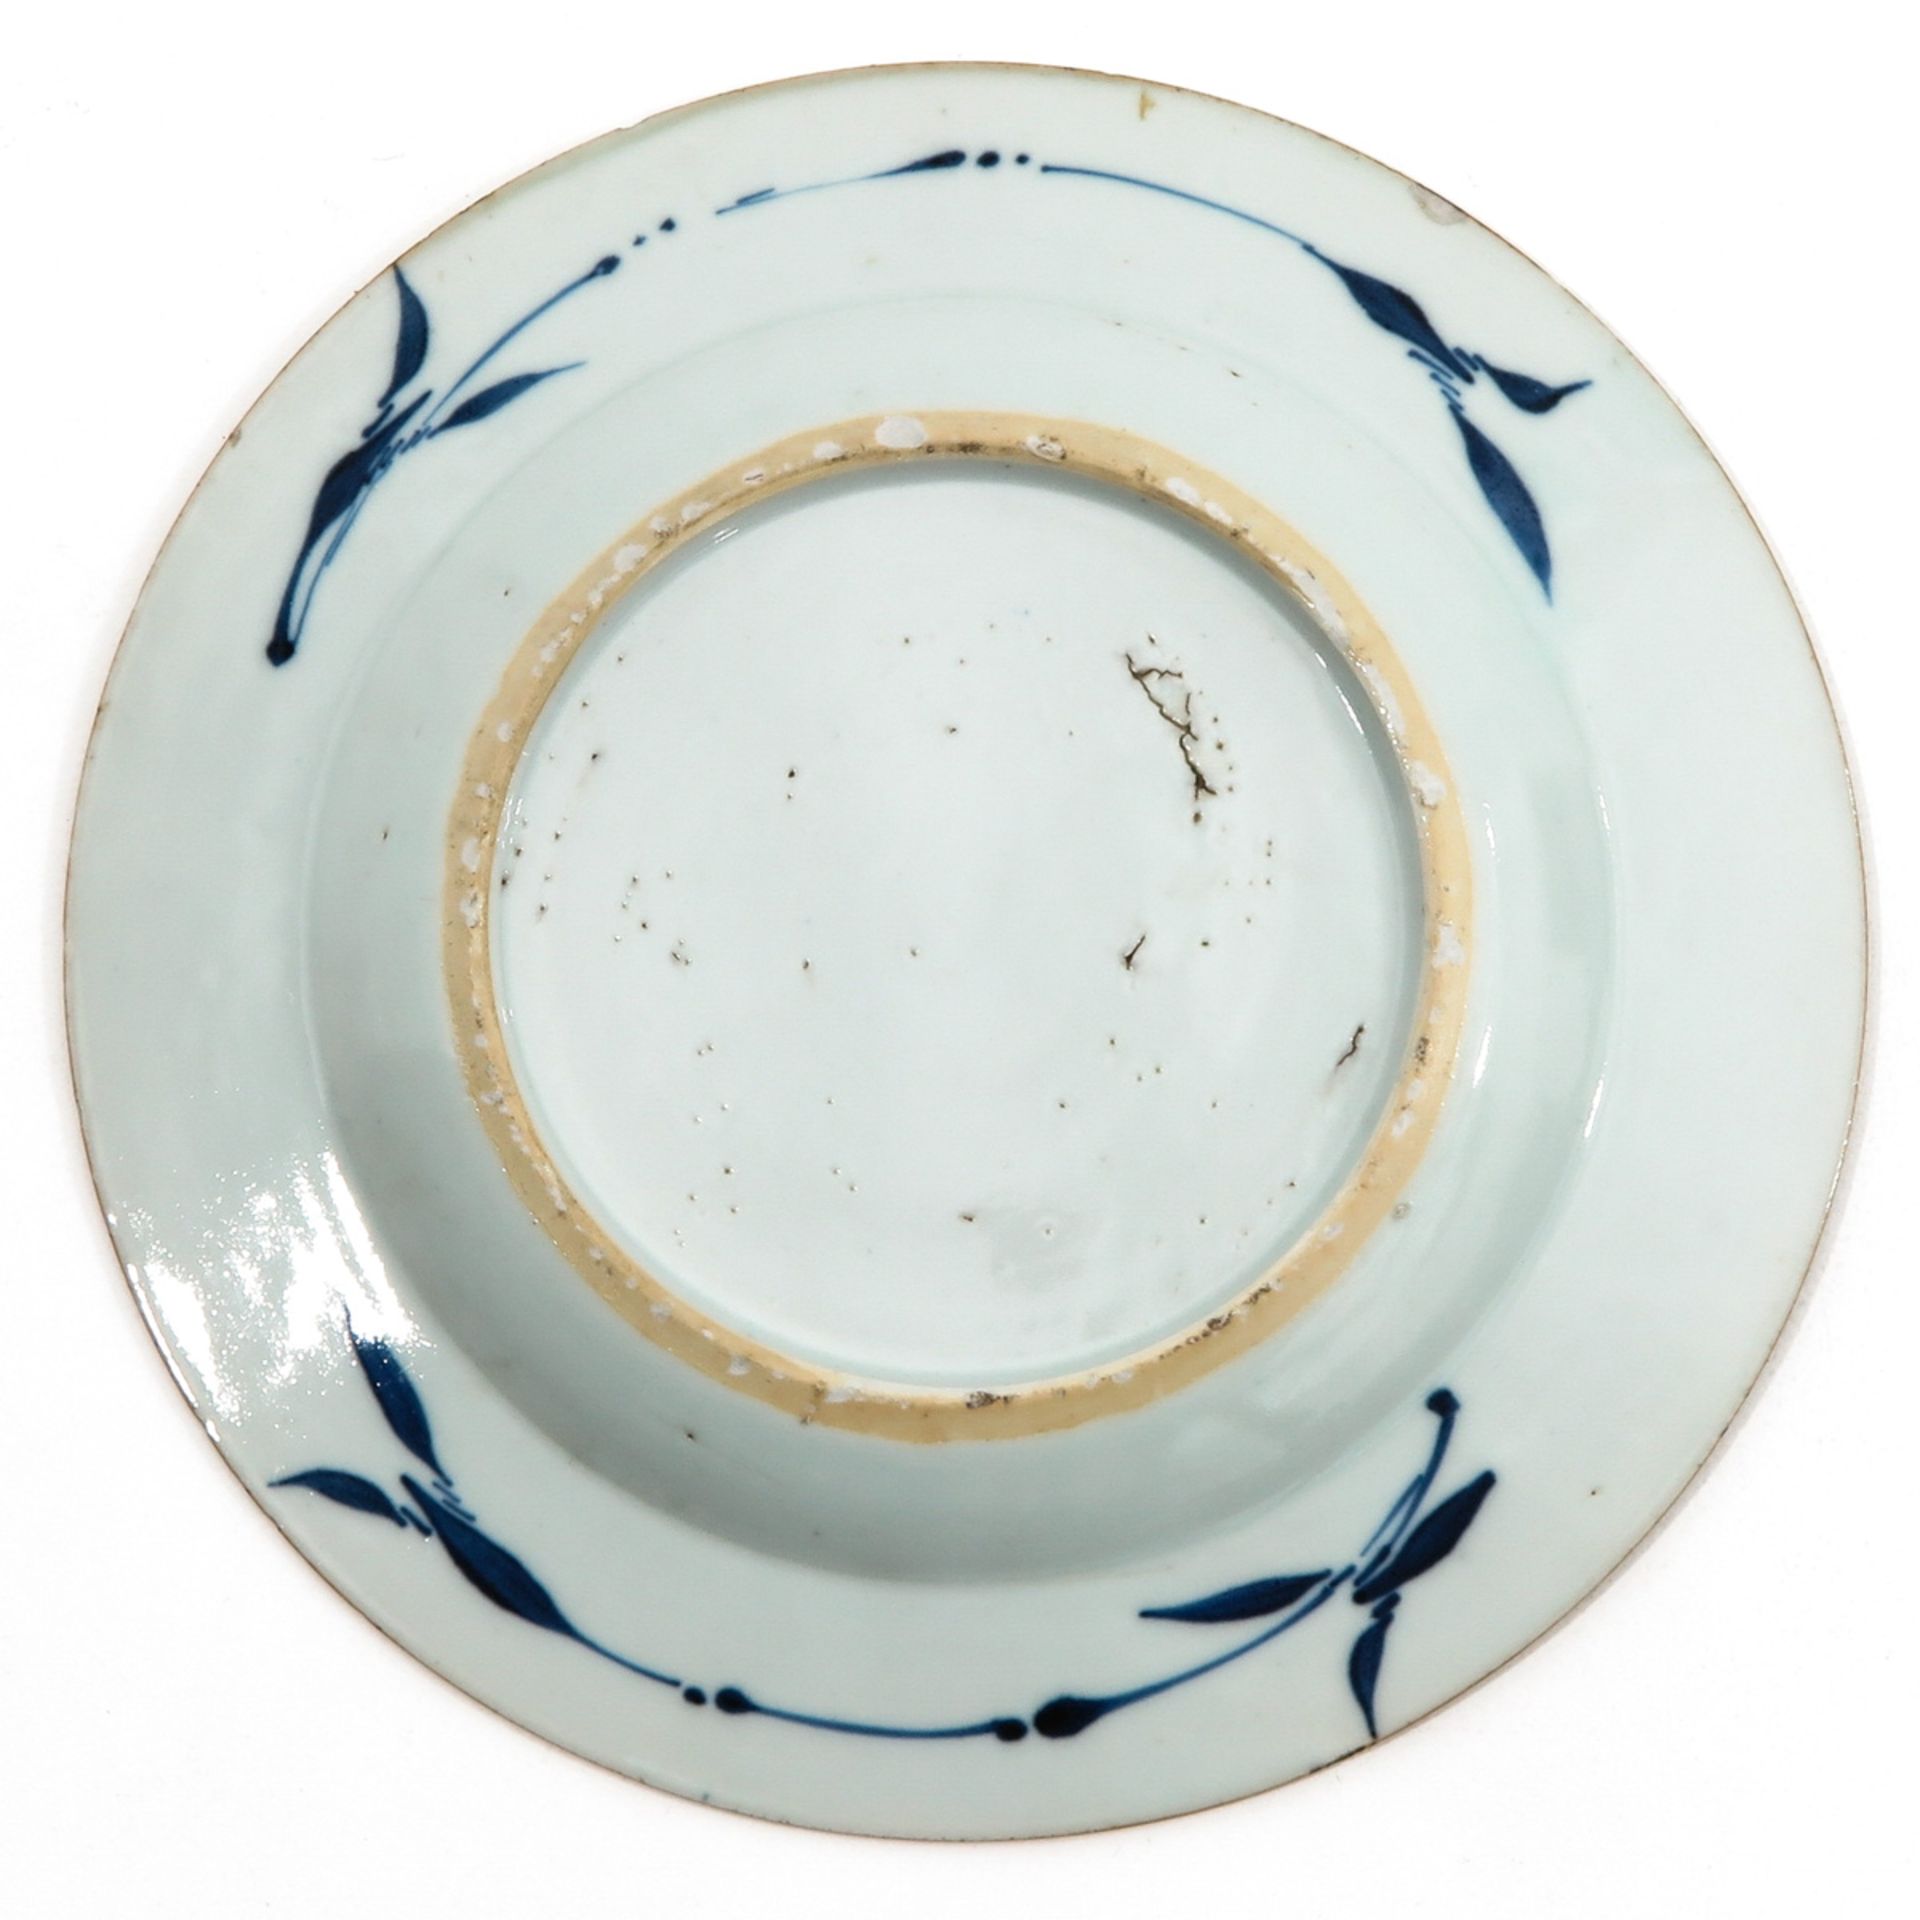 A Series of 3 Blue and White Plates - Bild 4 aus 10